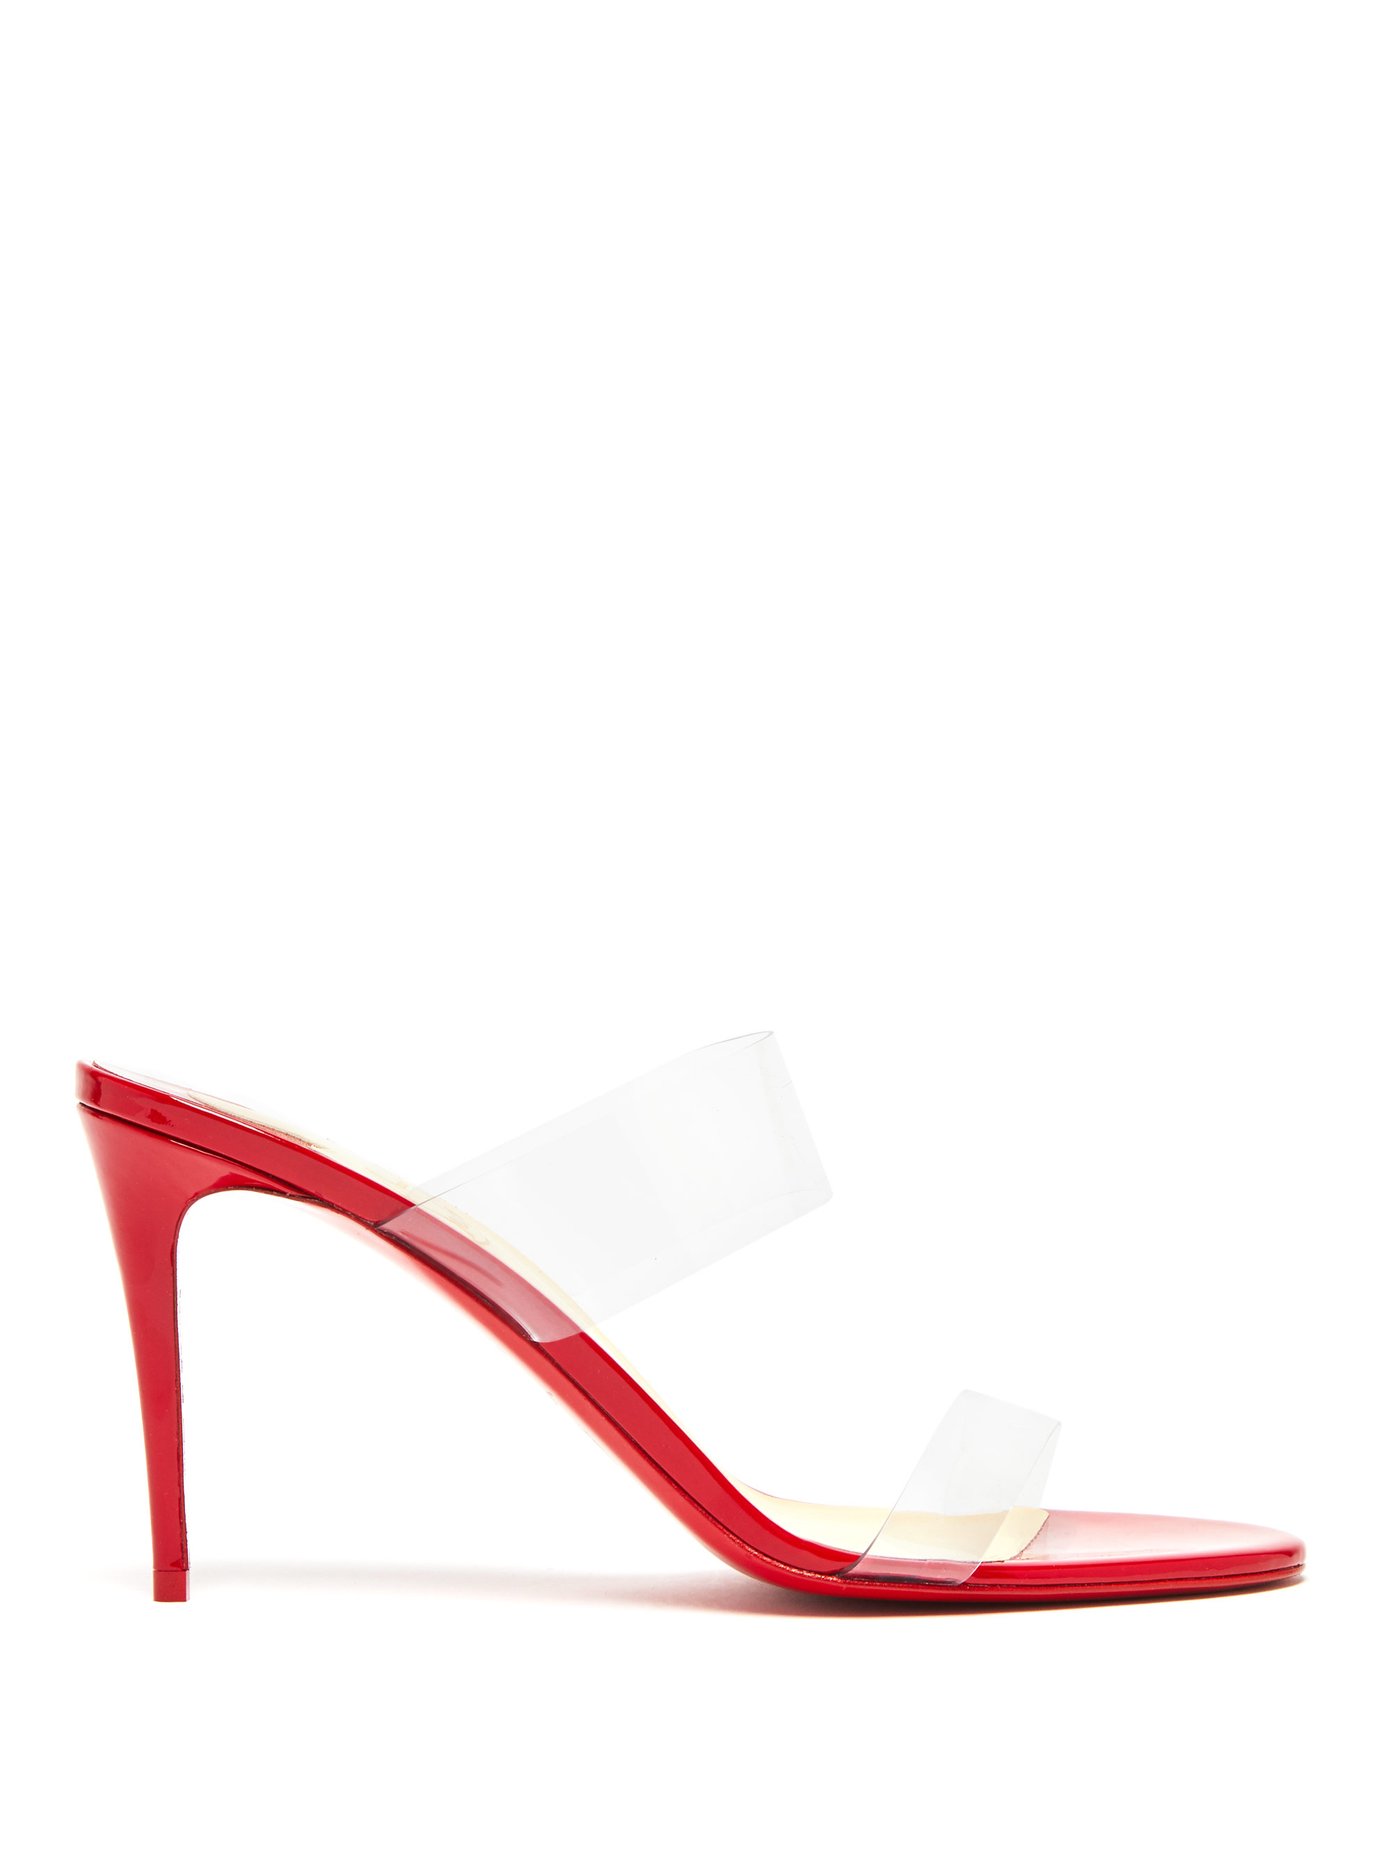 christian louboutin just nothing